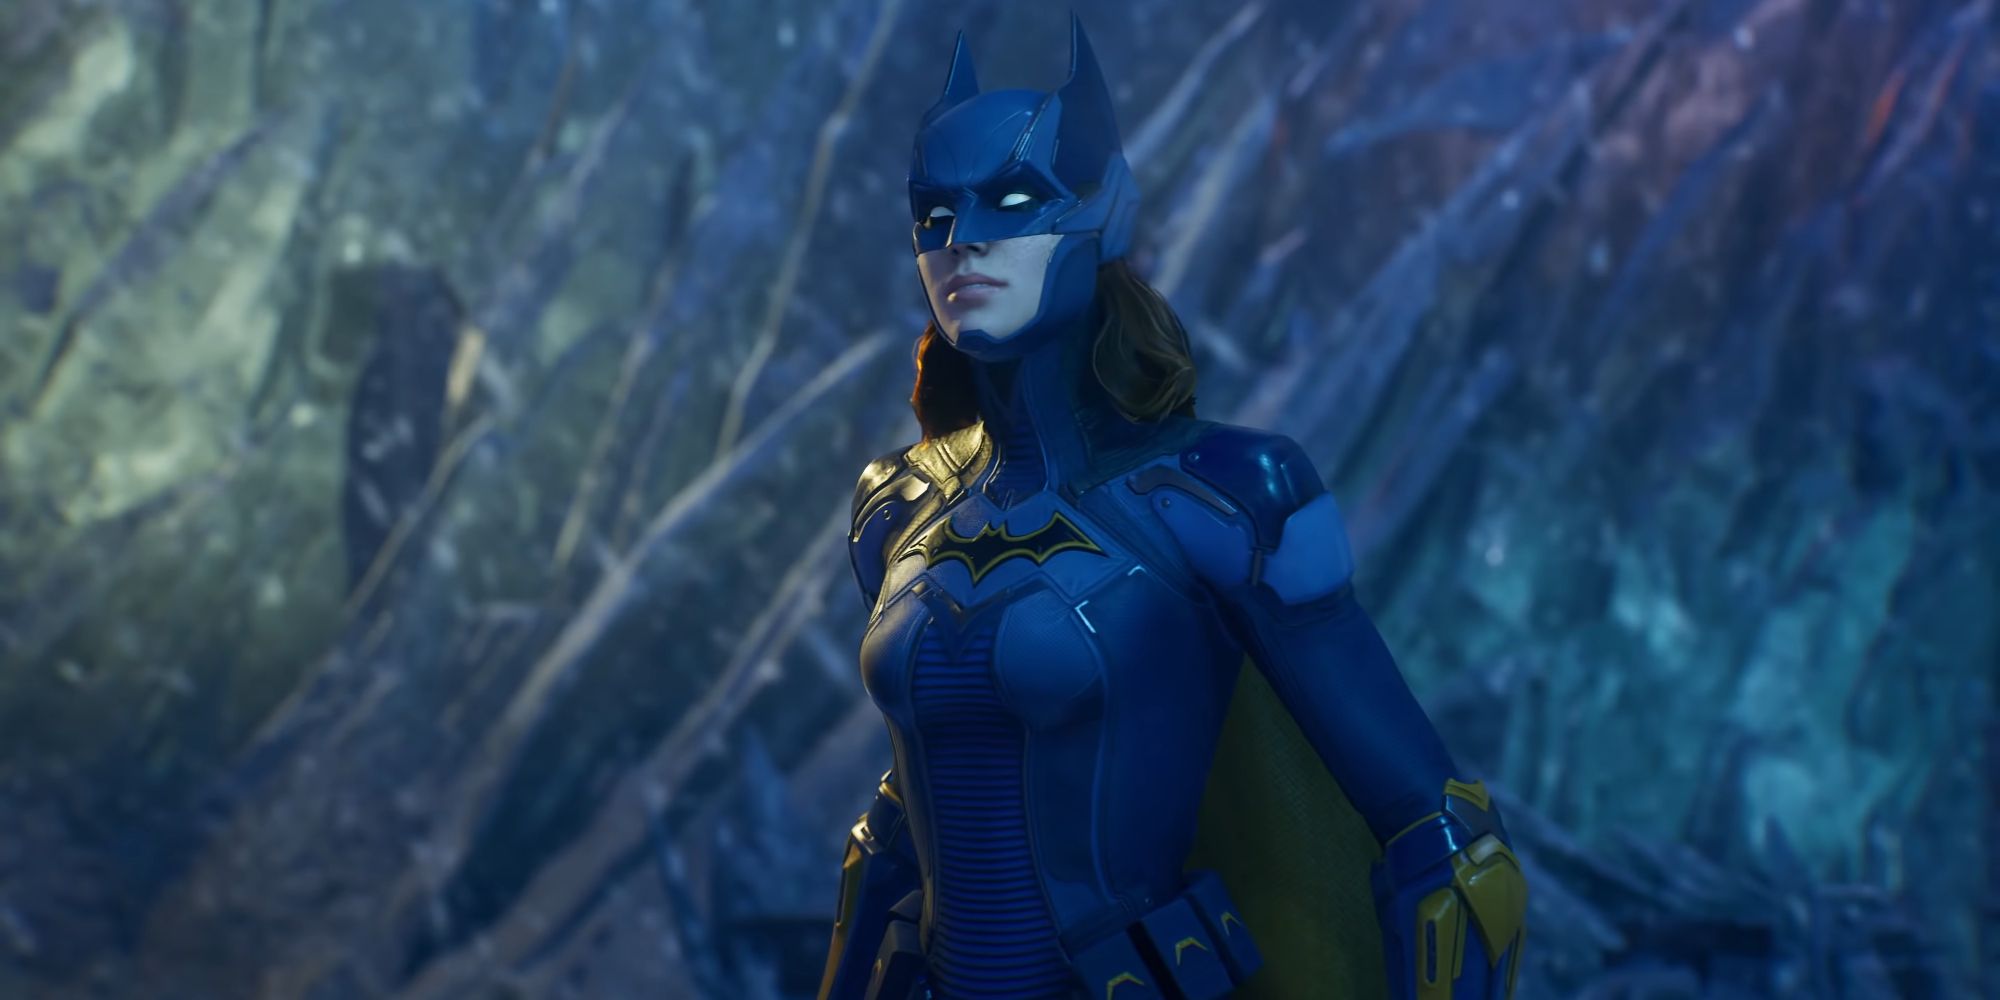 Batgirl in her armored batsuit in Mr. Freeze's fortress in Gotham Knights